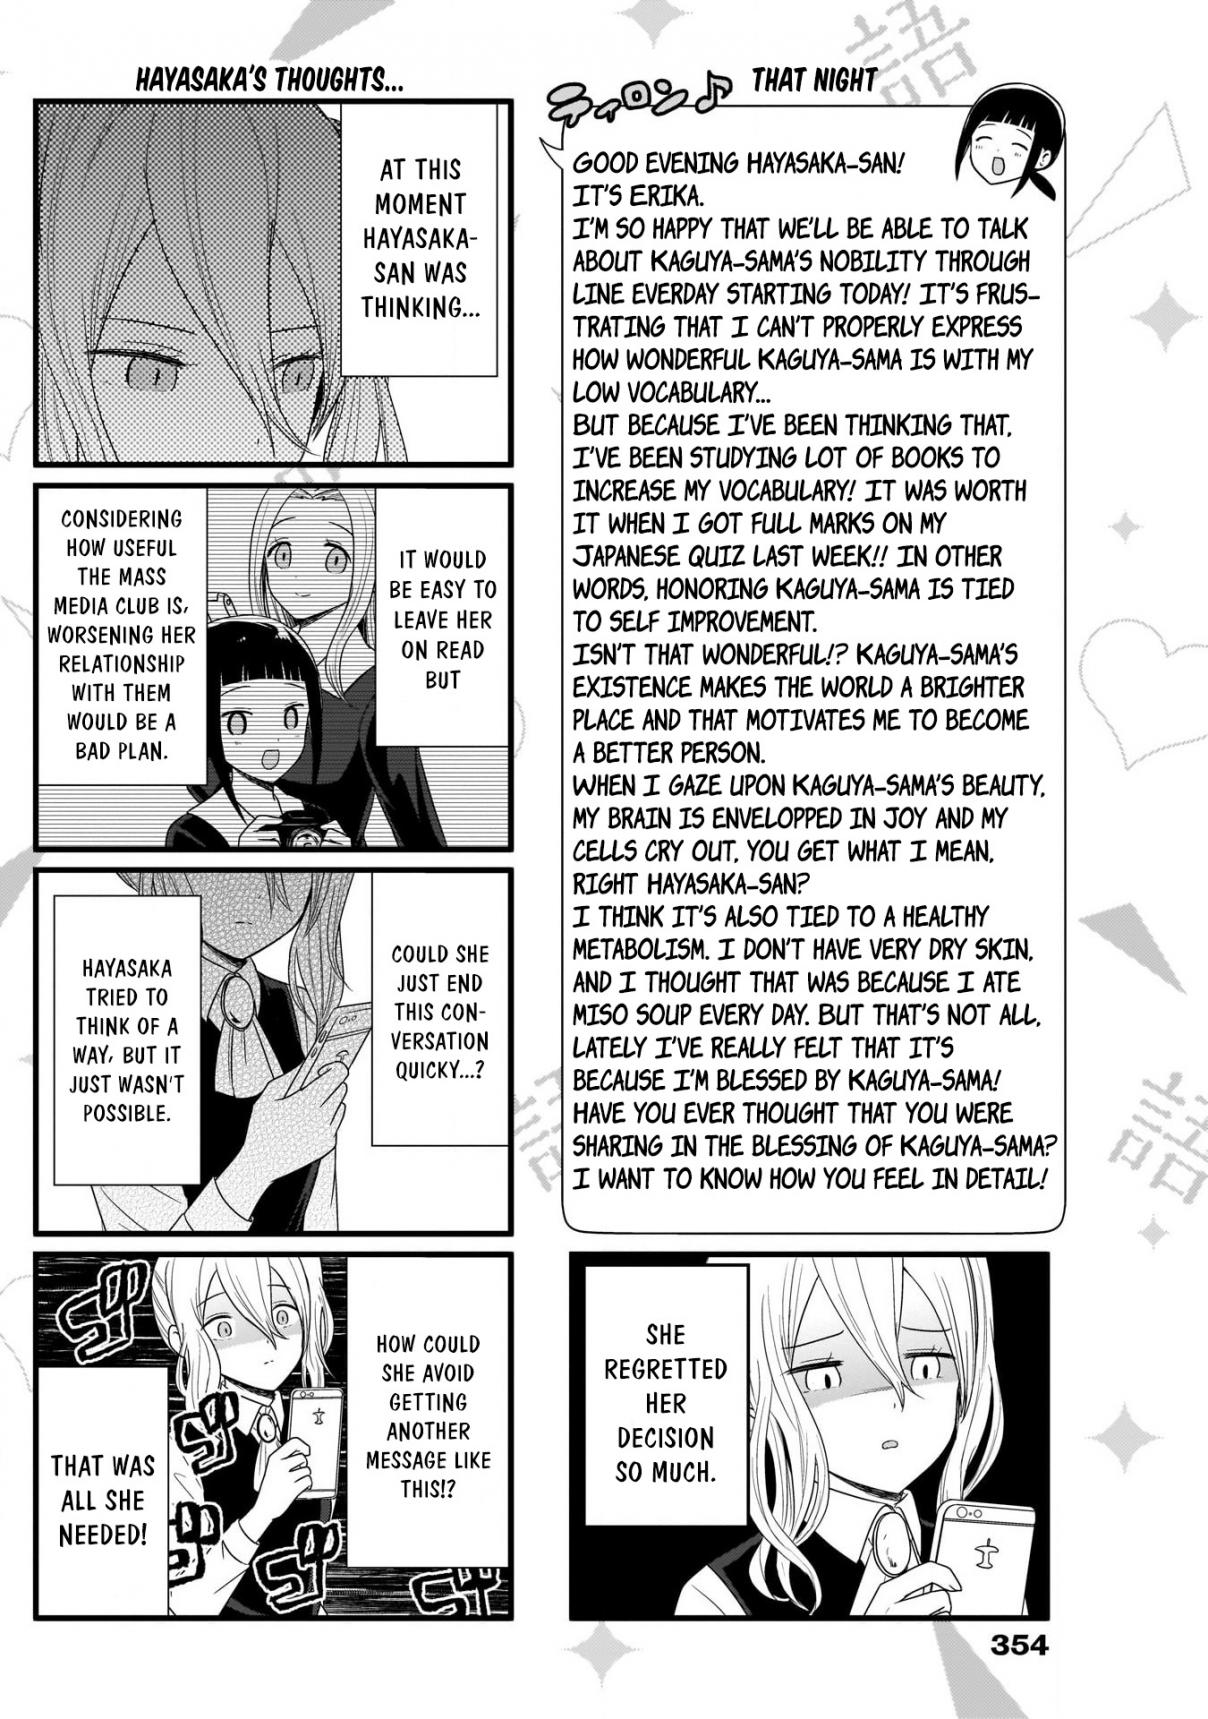 We Want to Talk About Kaguya Ch. 89 We Want to Talk Through Line